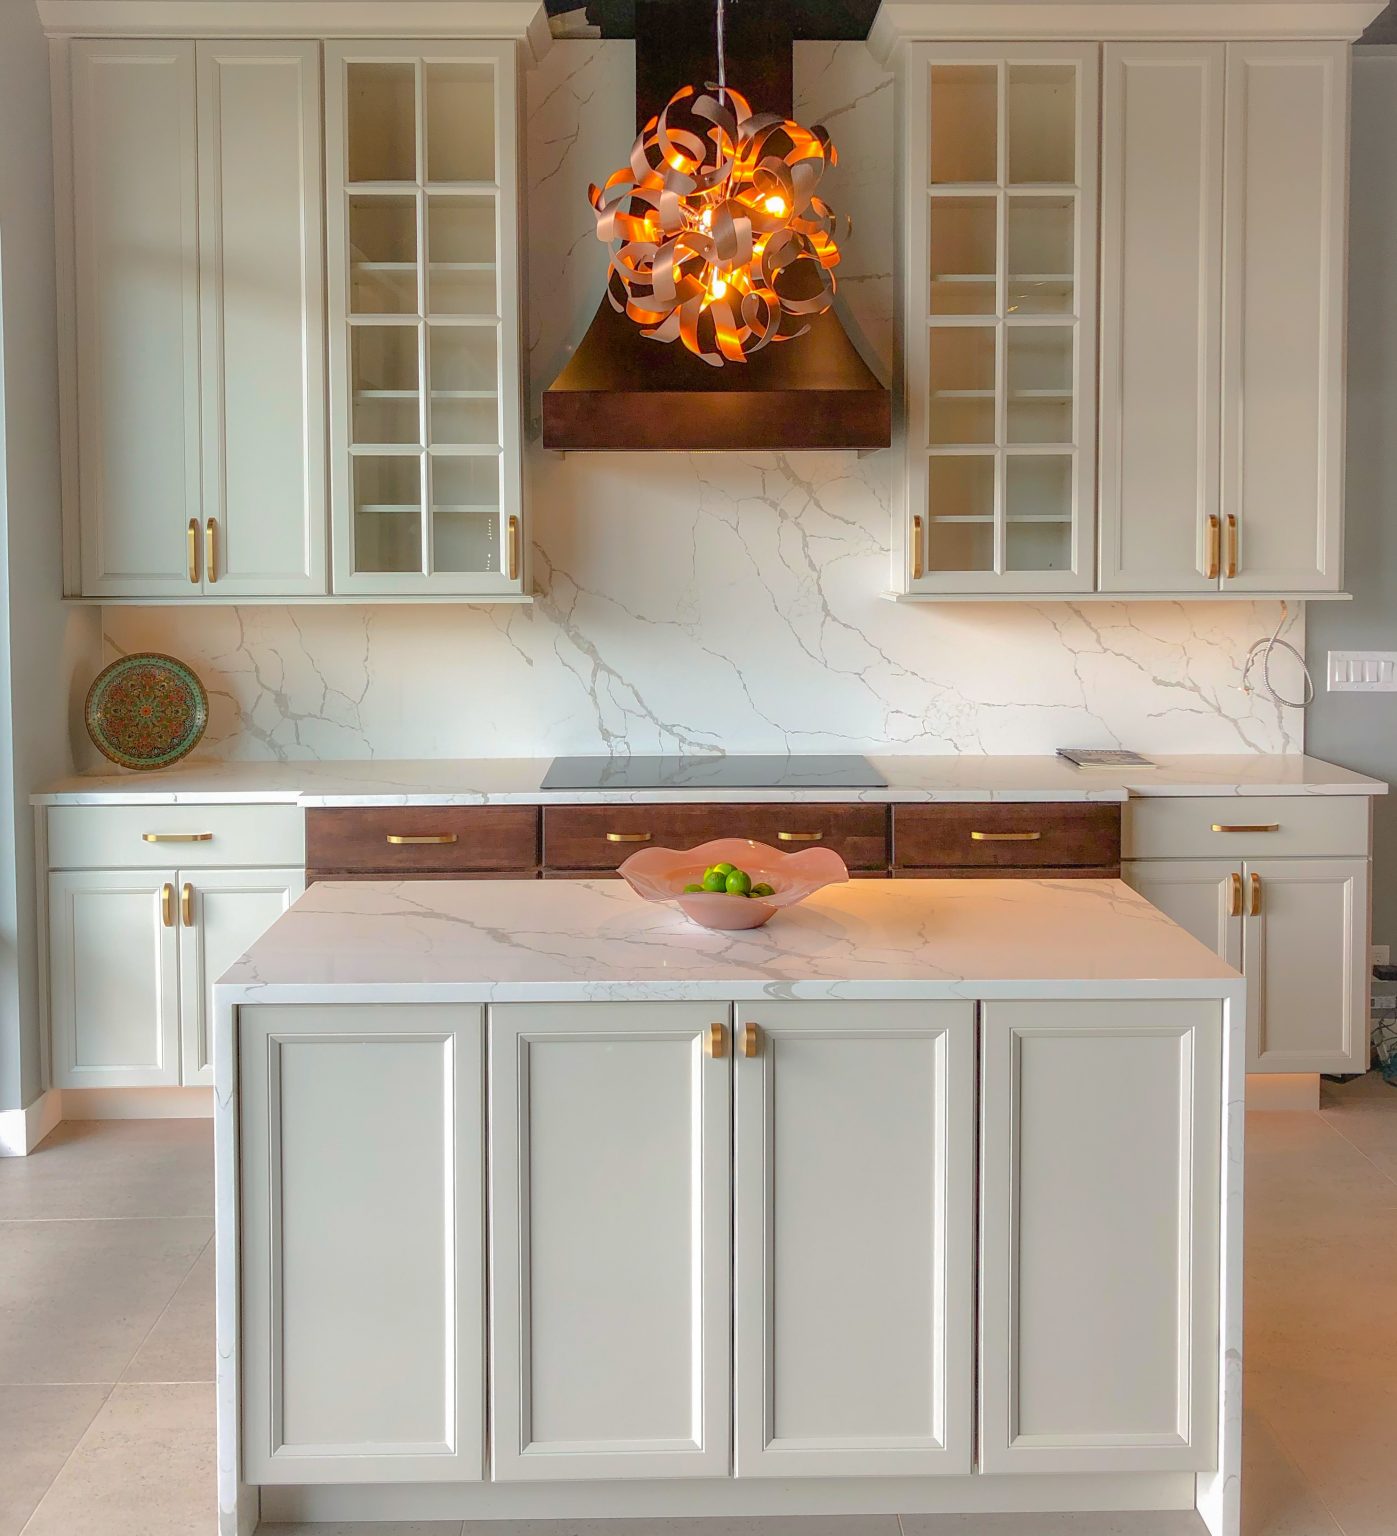 waterfall edge countertop on white cabinets